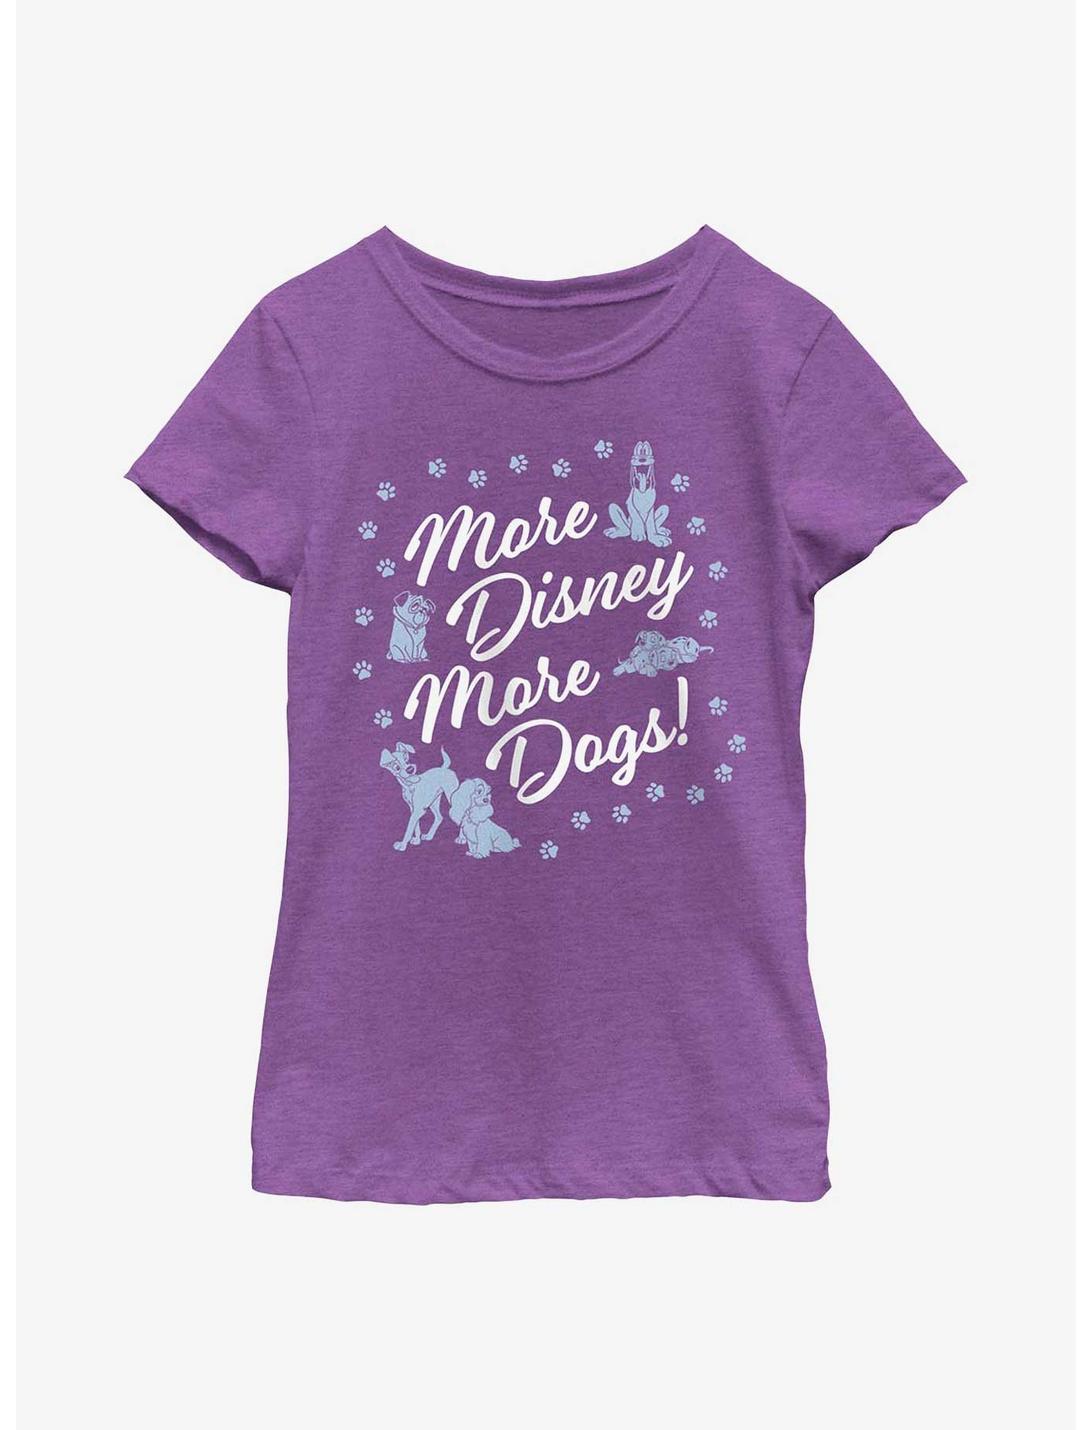 Disney Channel More Dogs Youth Girls T-Shirt, PURPLE BERRY, hi-res